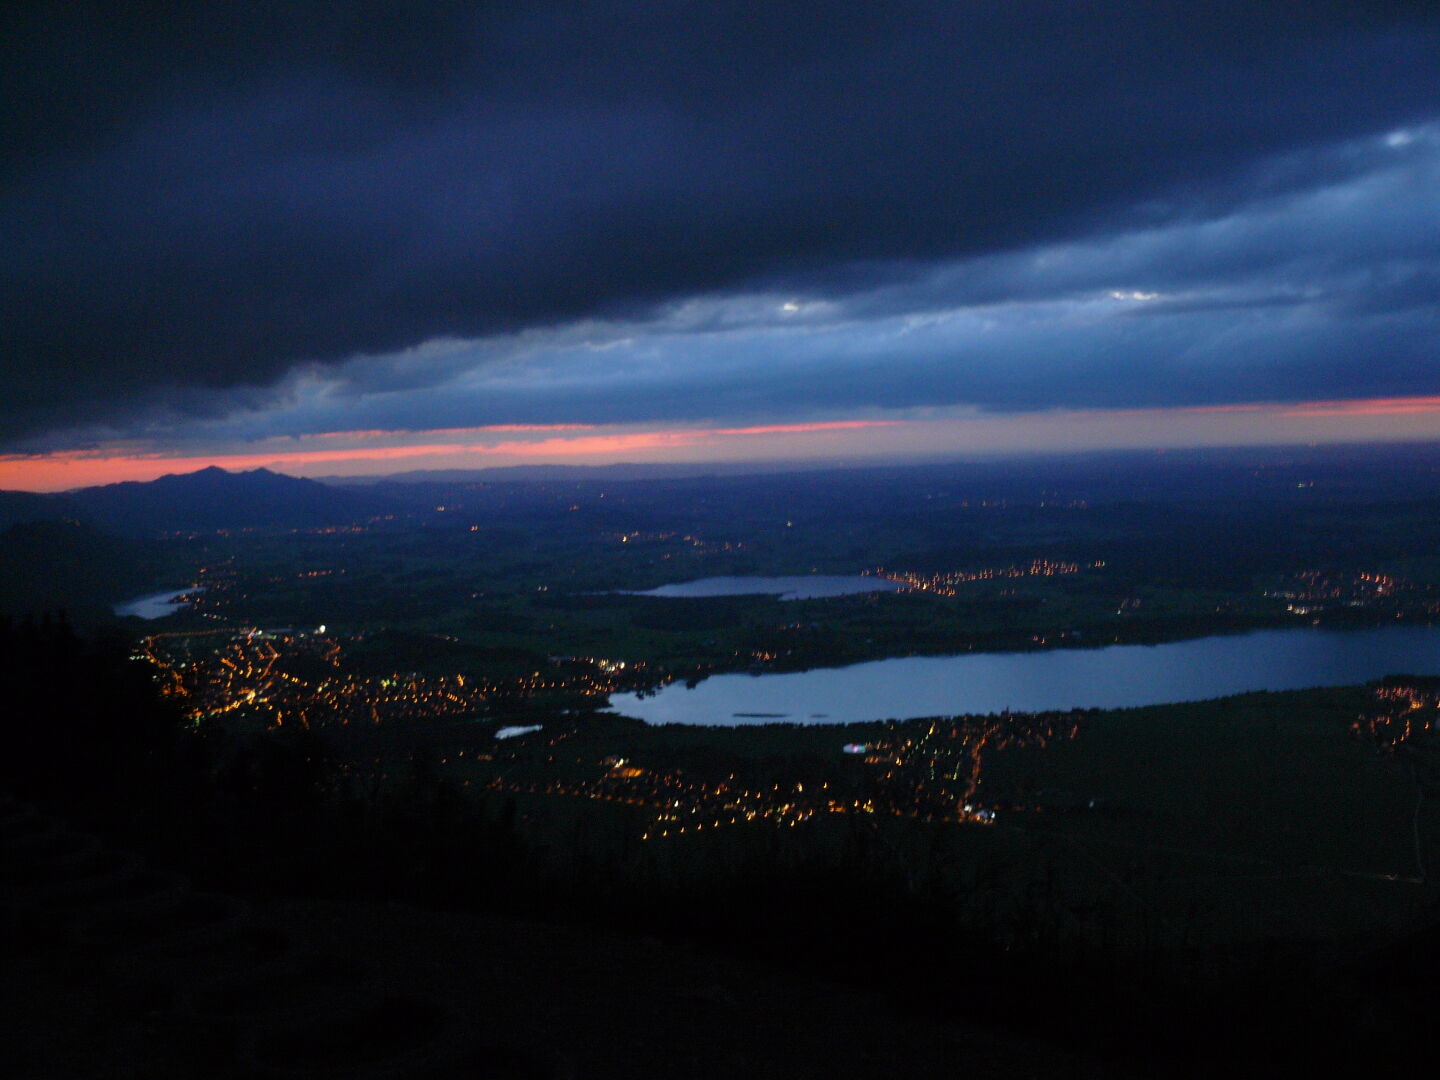 The Forggensee and city of Füssen in the evening, as seen from Tegelberghaus.